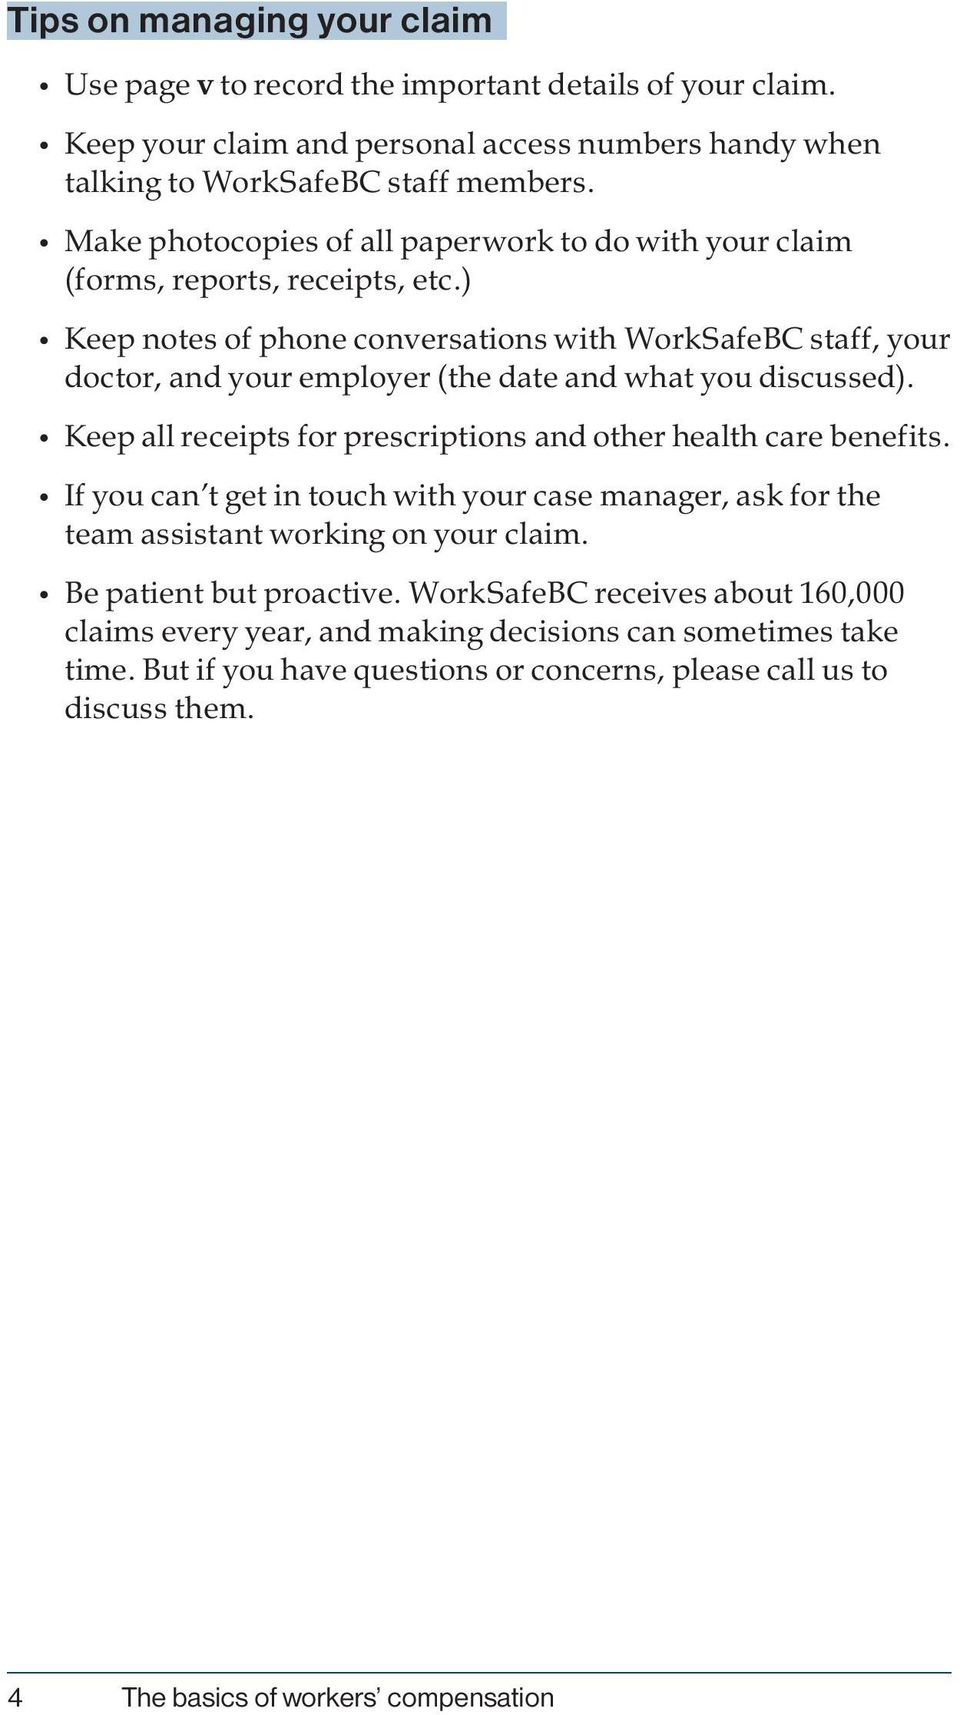 ) Keep notes of phone conversations with WorkSafeBC staff, your doctor, and your employer (the date and what you discussed). Keep all receipts for prescriptions and other health care benefits.